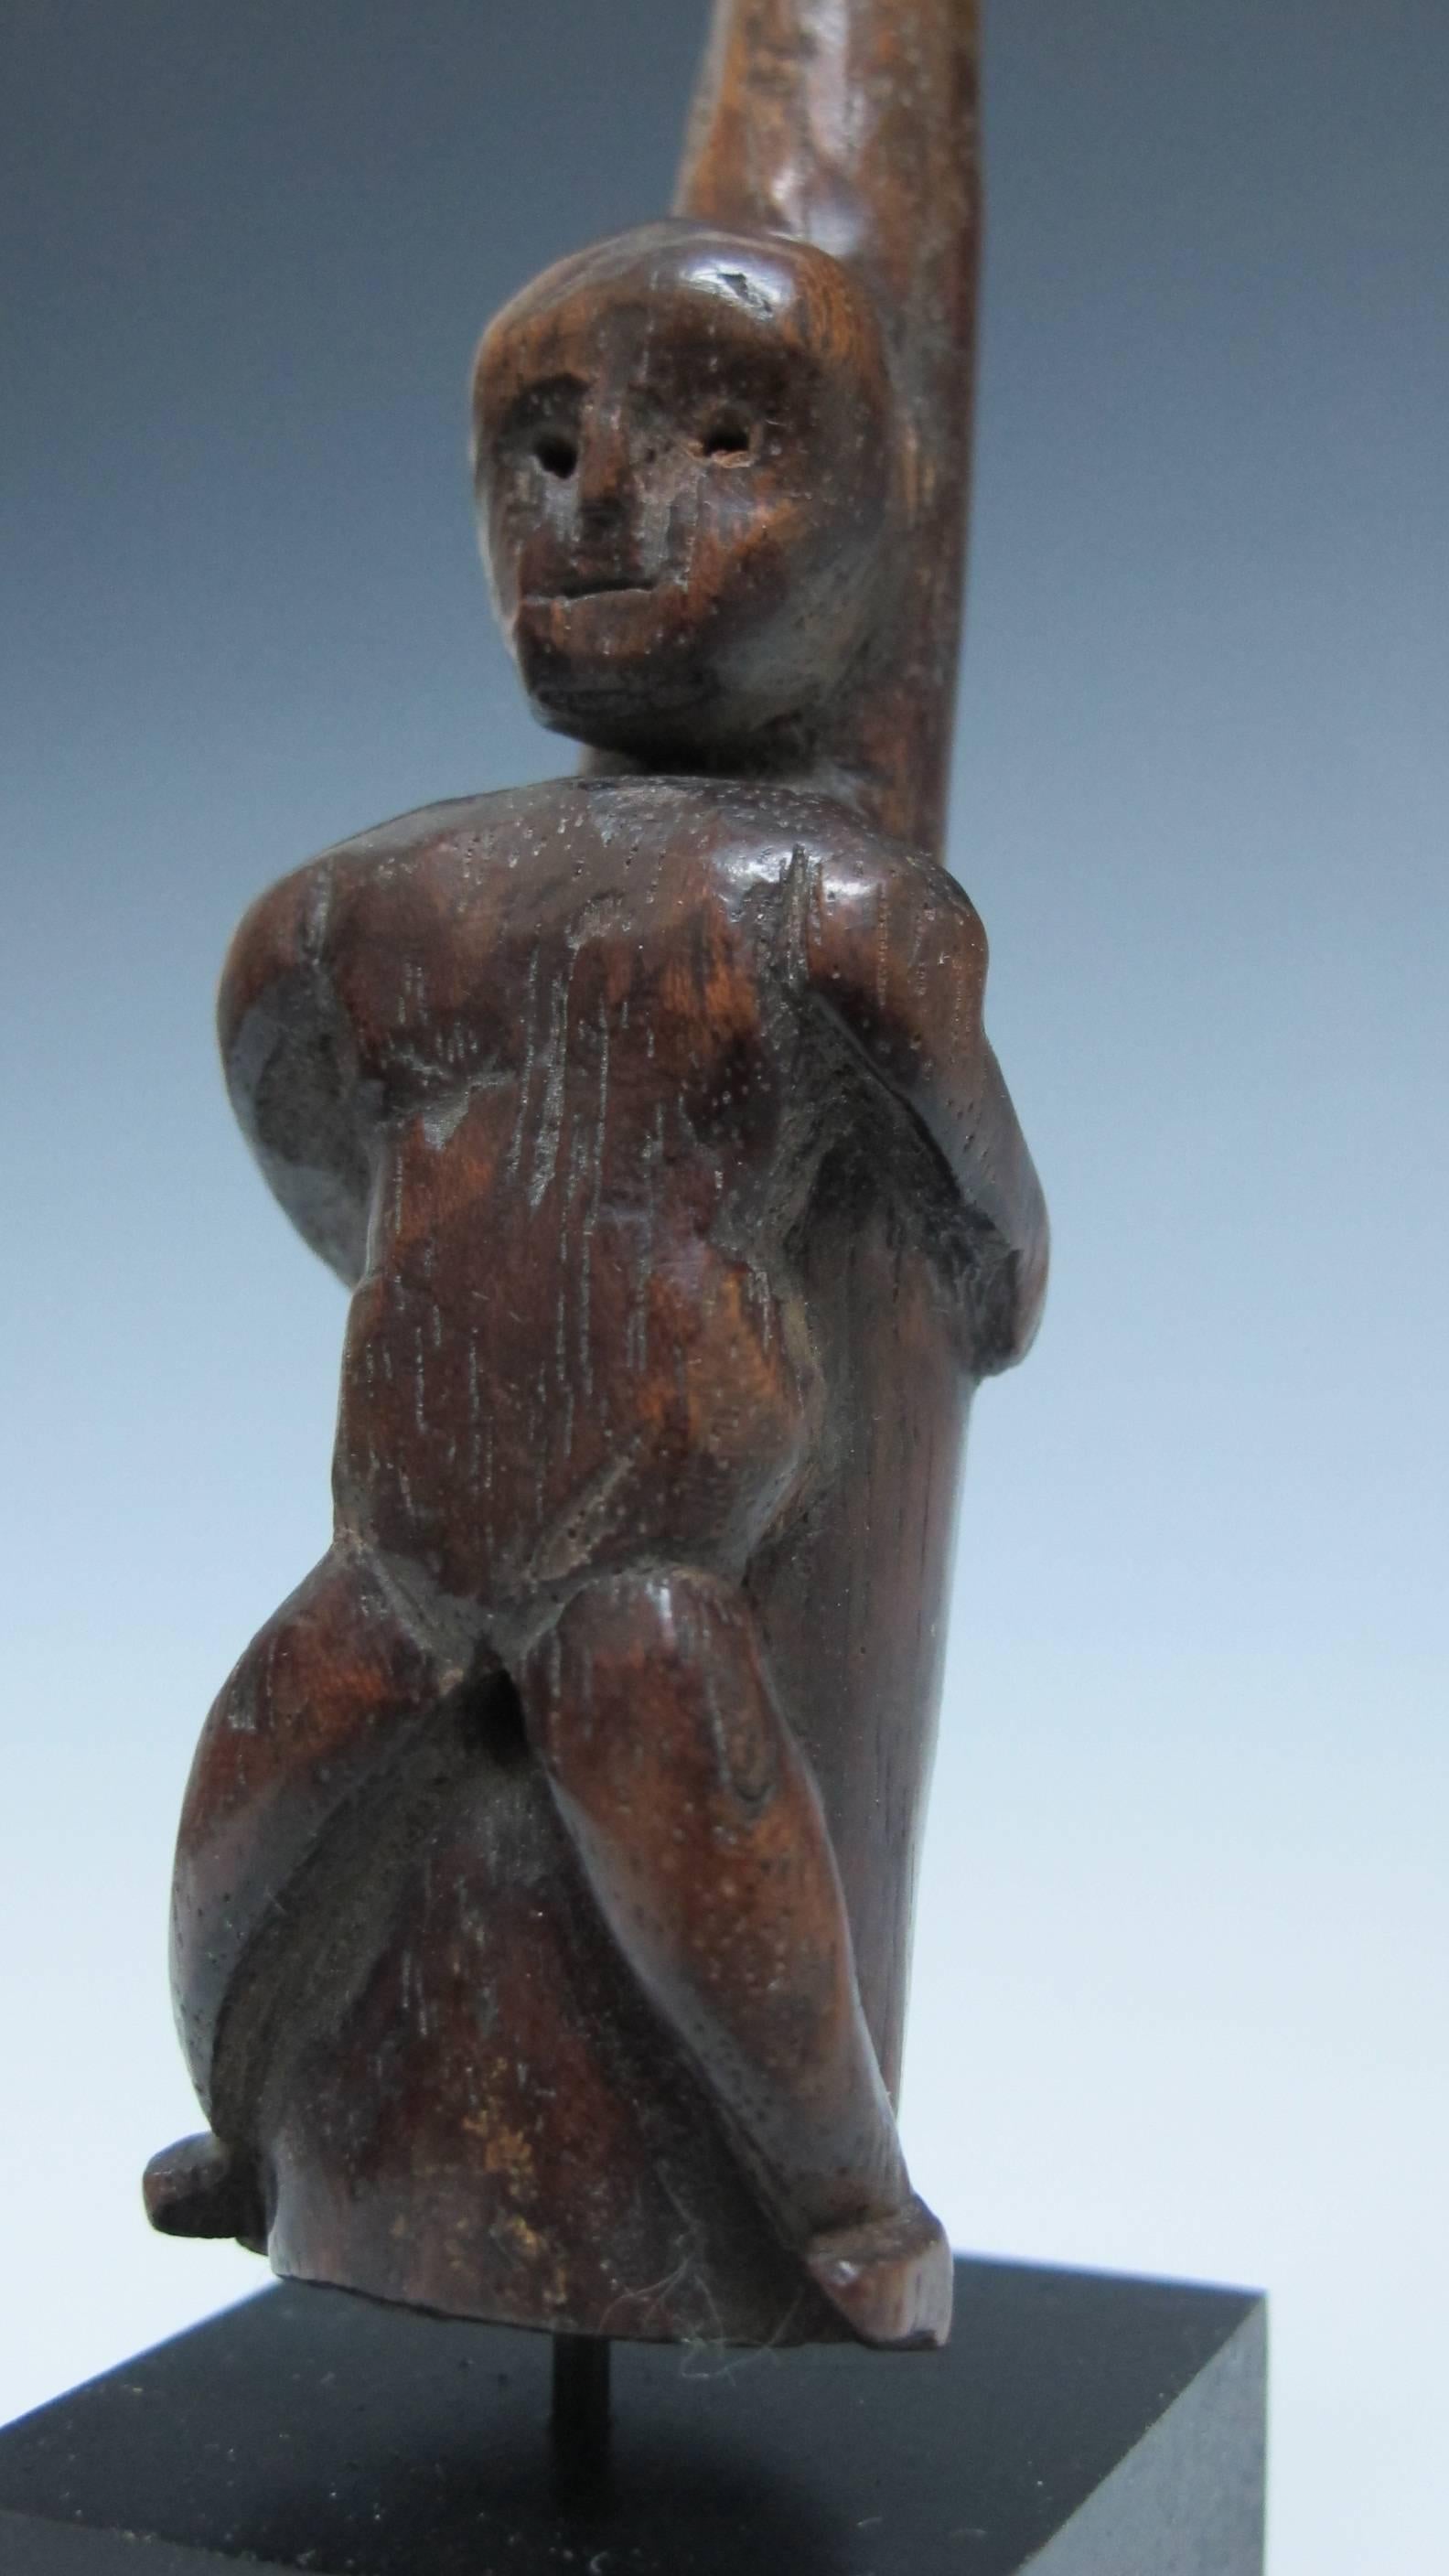 Unusual carved wood figure laying on a bottle shaped smoking piece with arms and legs pulled back provocatively with small opening between the legs. The top narrow end would be the mouthpiece. At the lower end there is an opening of 1/2 inch with a